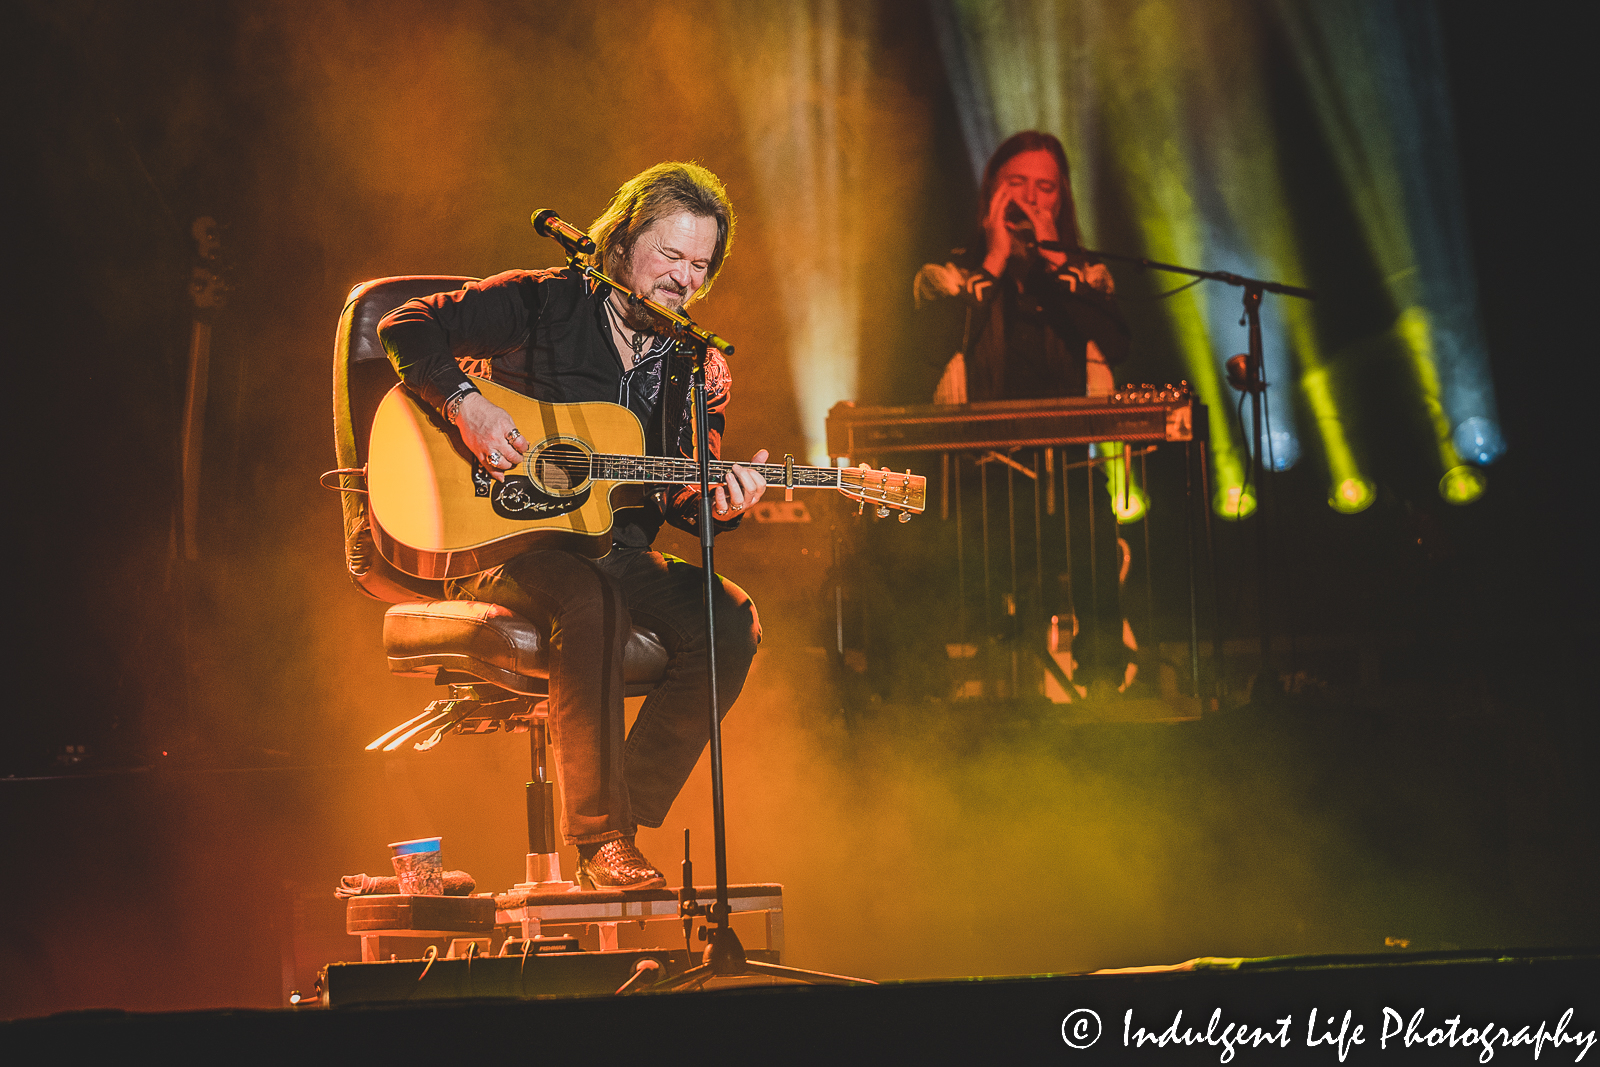 Travis Tritt performing live with his lap steel guitar player on the harmonica at Ameristar Casino in Kansas City. MO on December 10, 2022.